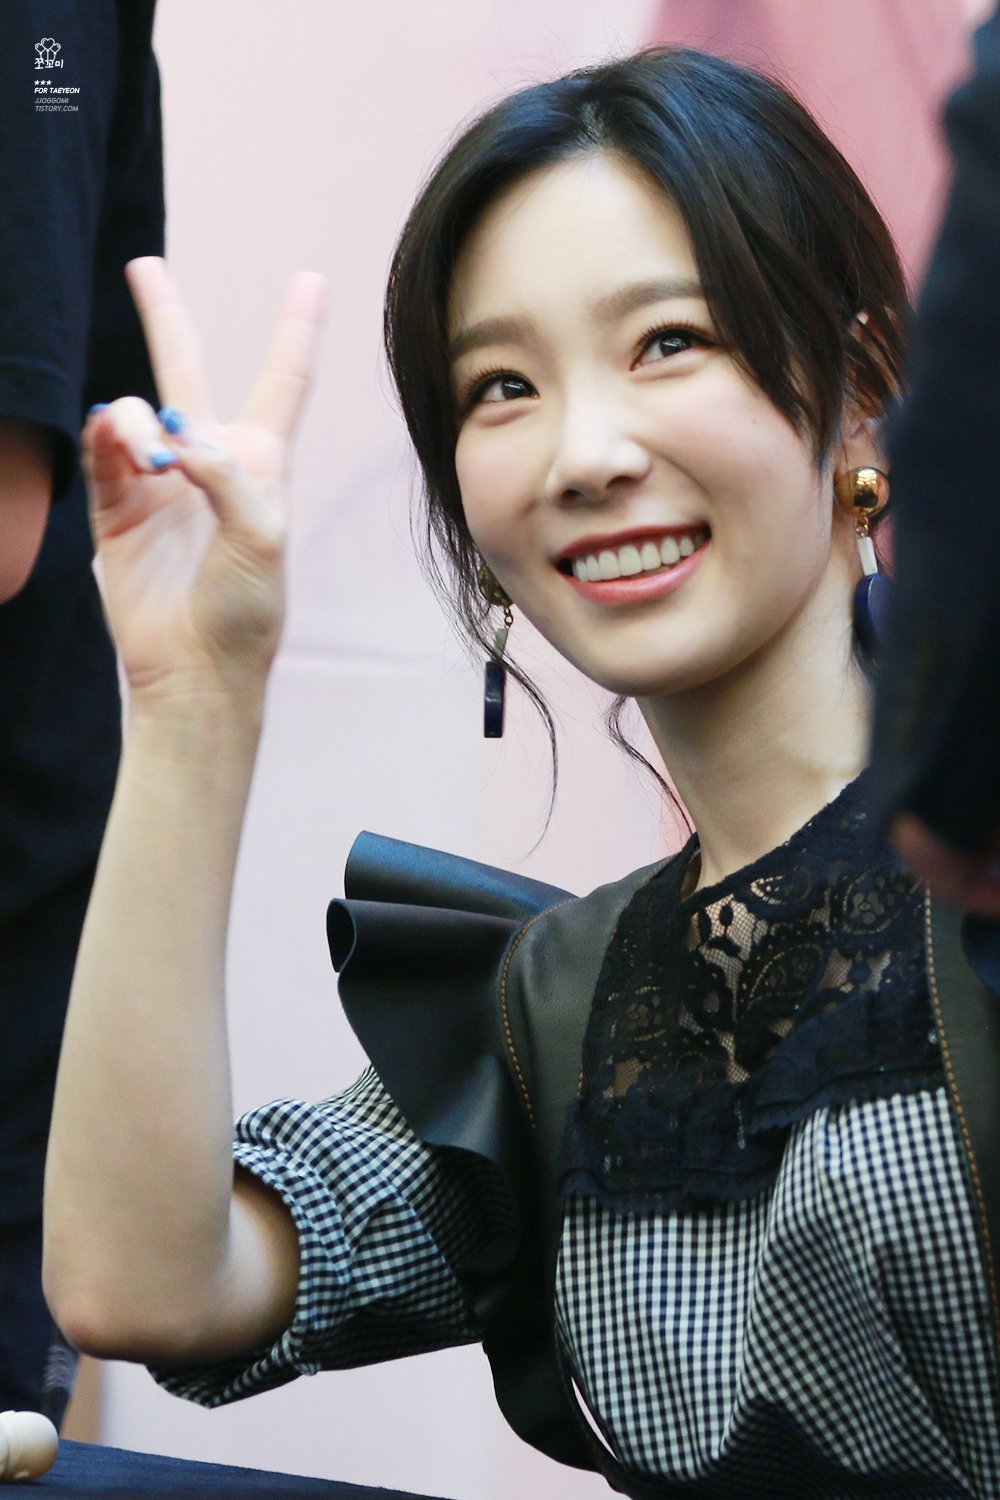 [PIC][16-04-2017]TaeYeon tham dự buổi Fansign cho “MY VOICE DELUXE EDITION” tại AK PLAZA vào chiều nay  - Page 3 Hf8rlyw9IN-3000x3000